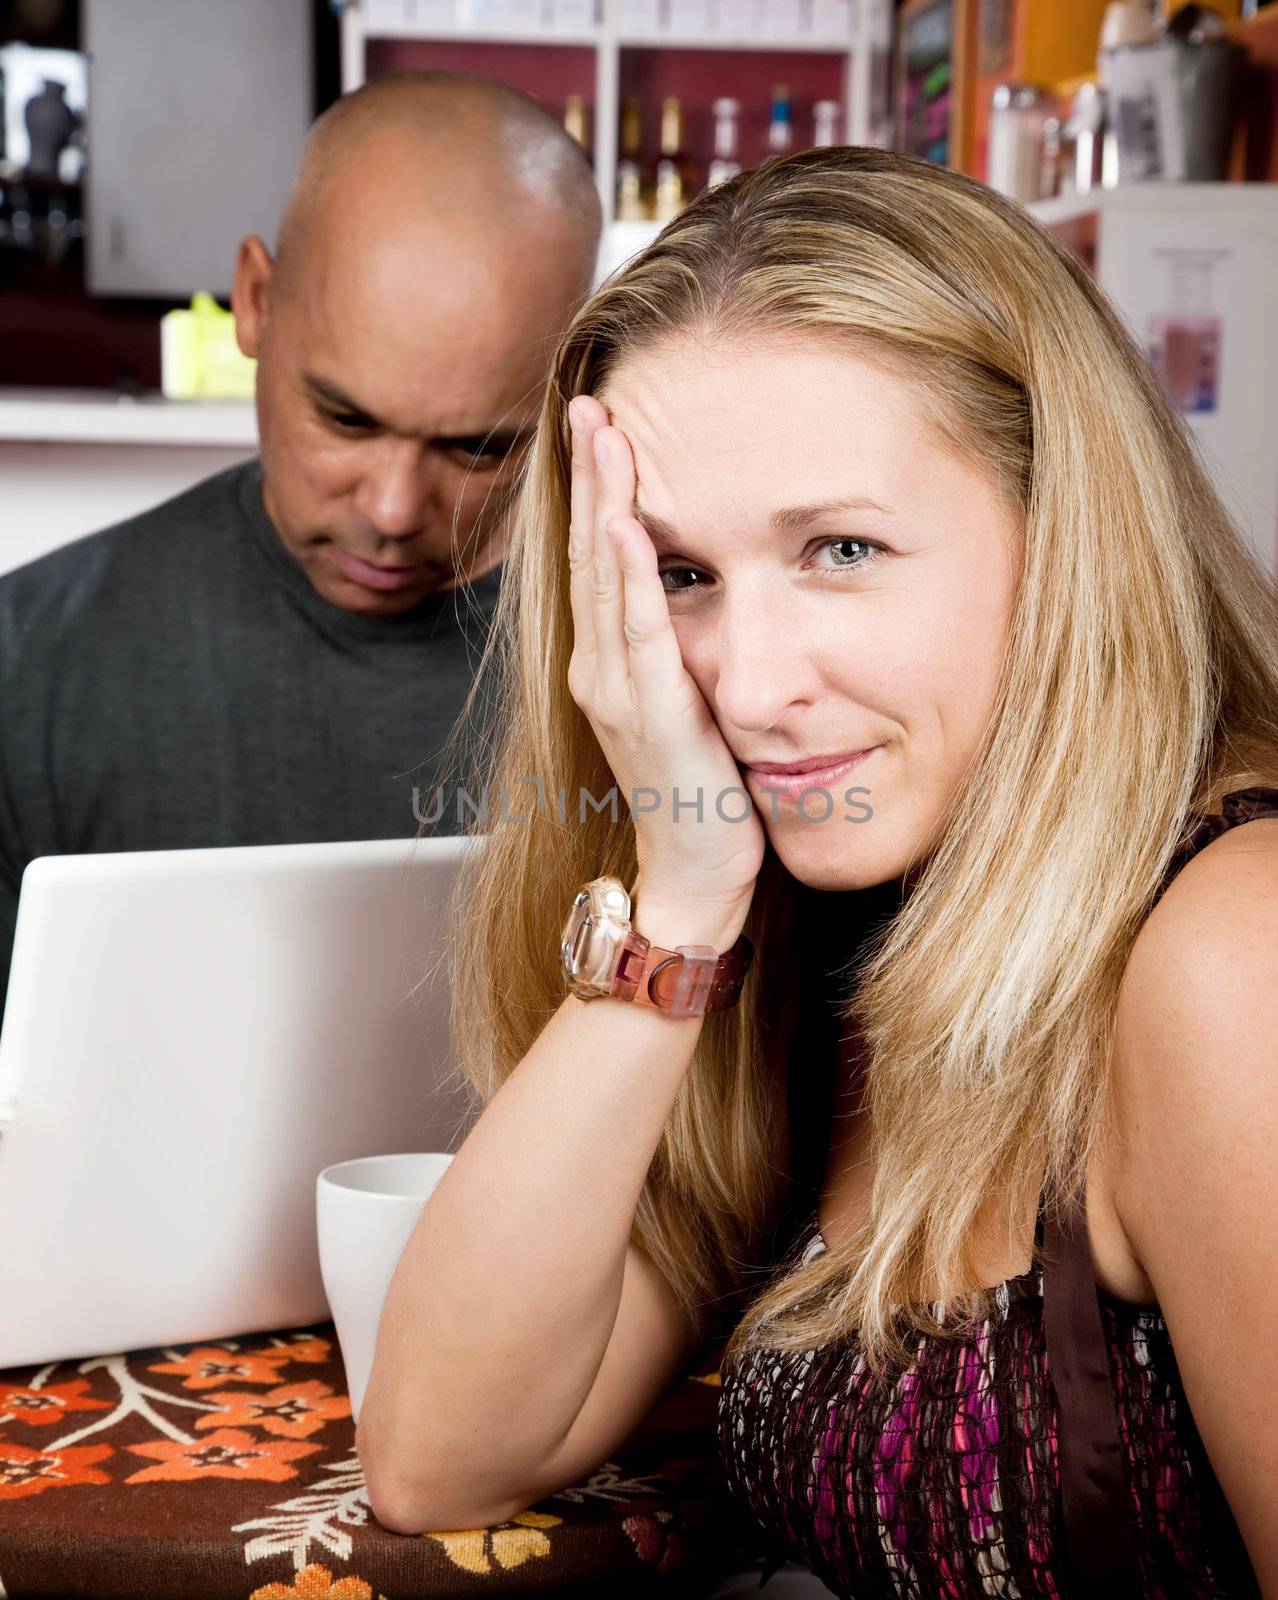 Bored woman with man on laptop computer in coffee house